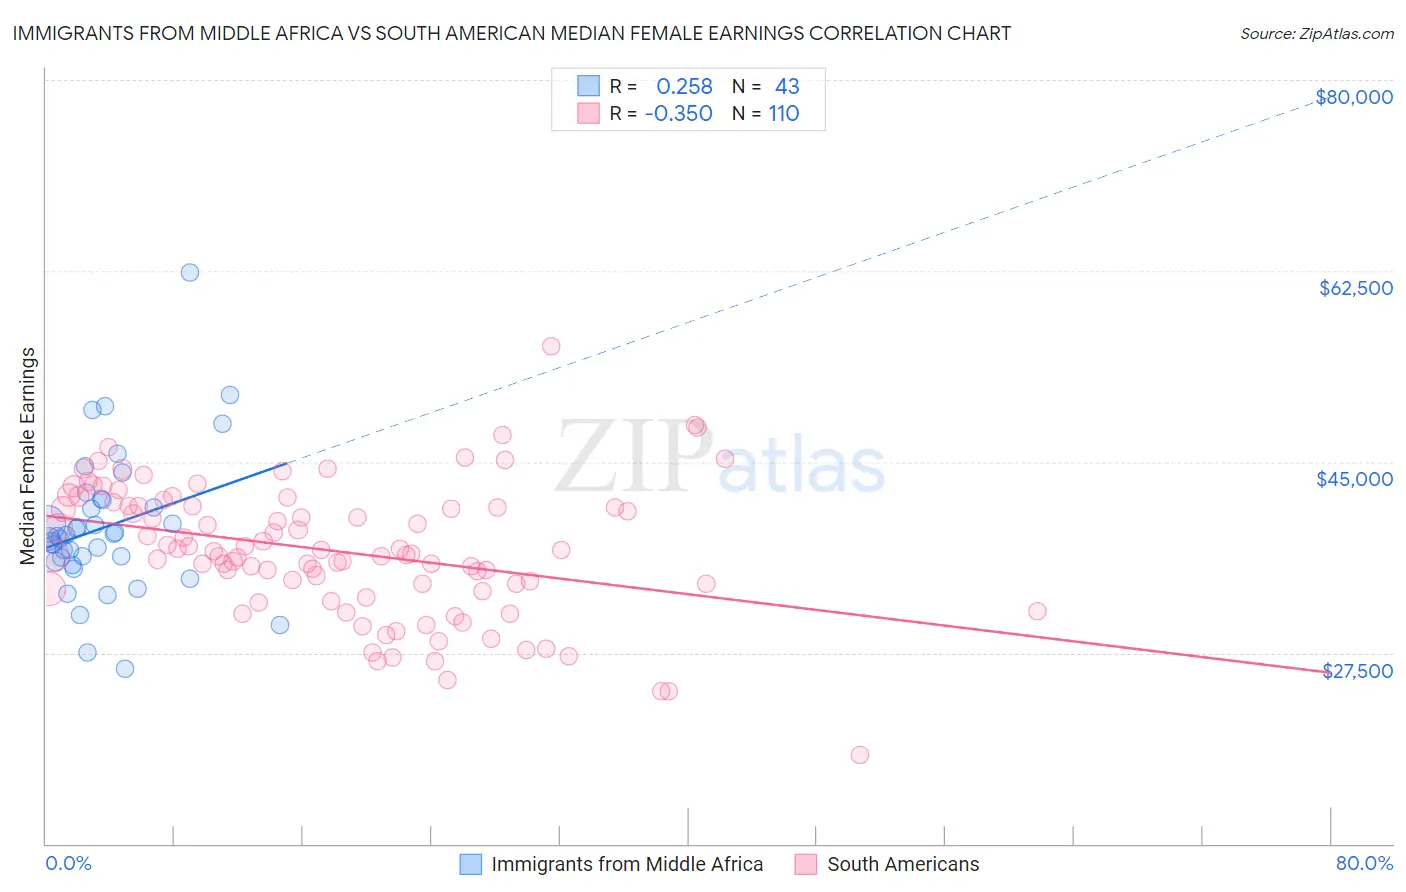 Immigrants from Middle Africa vs South American Median Female Earnings